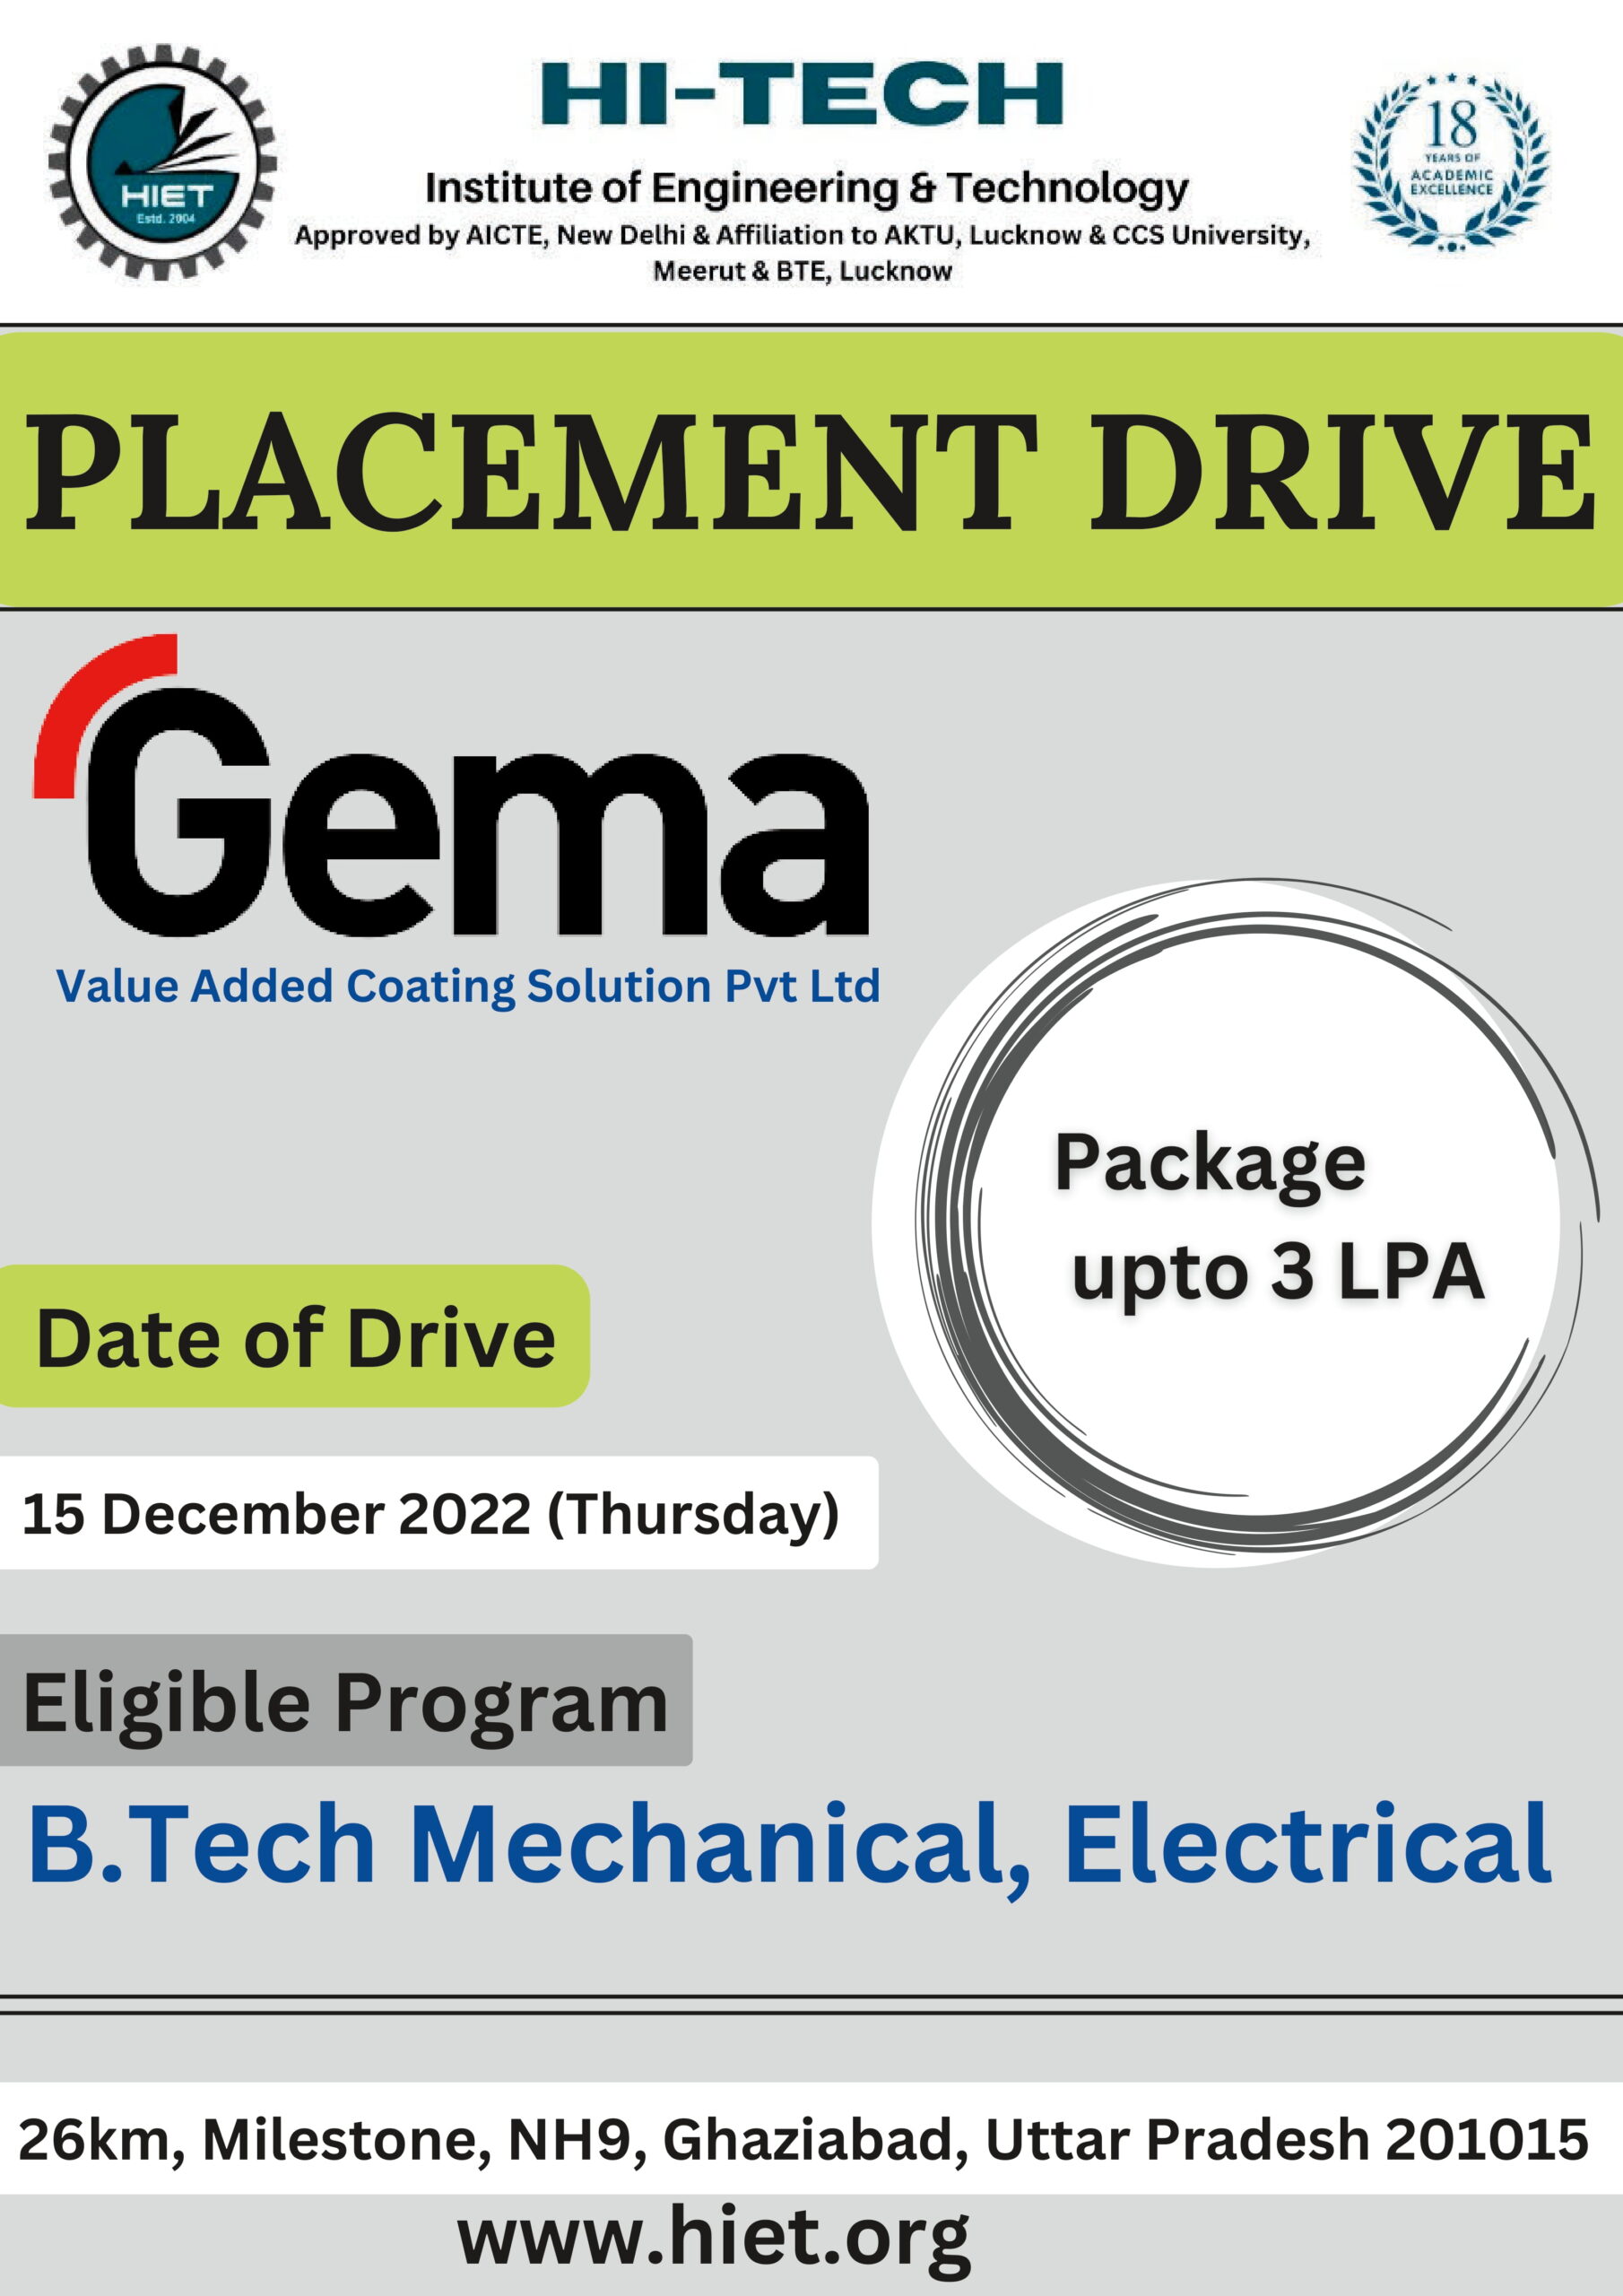 Placement Drive – Gema Value Added Coating Solution Pvt. Ltd. (15 December 2022)